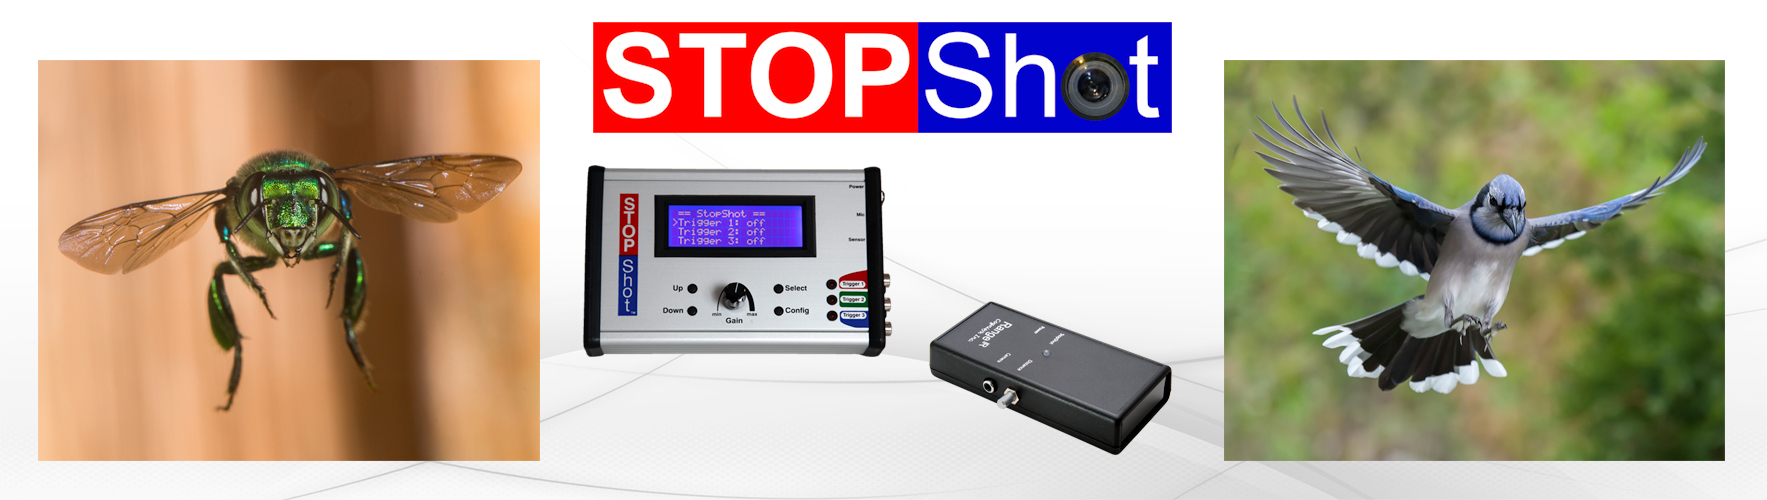 Use StopShot for High Speed Capture